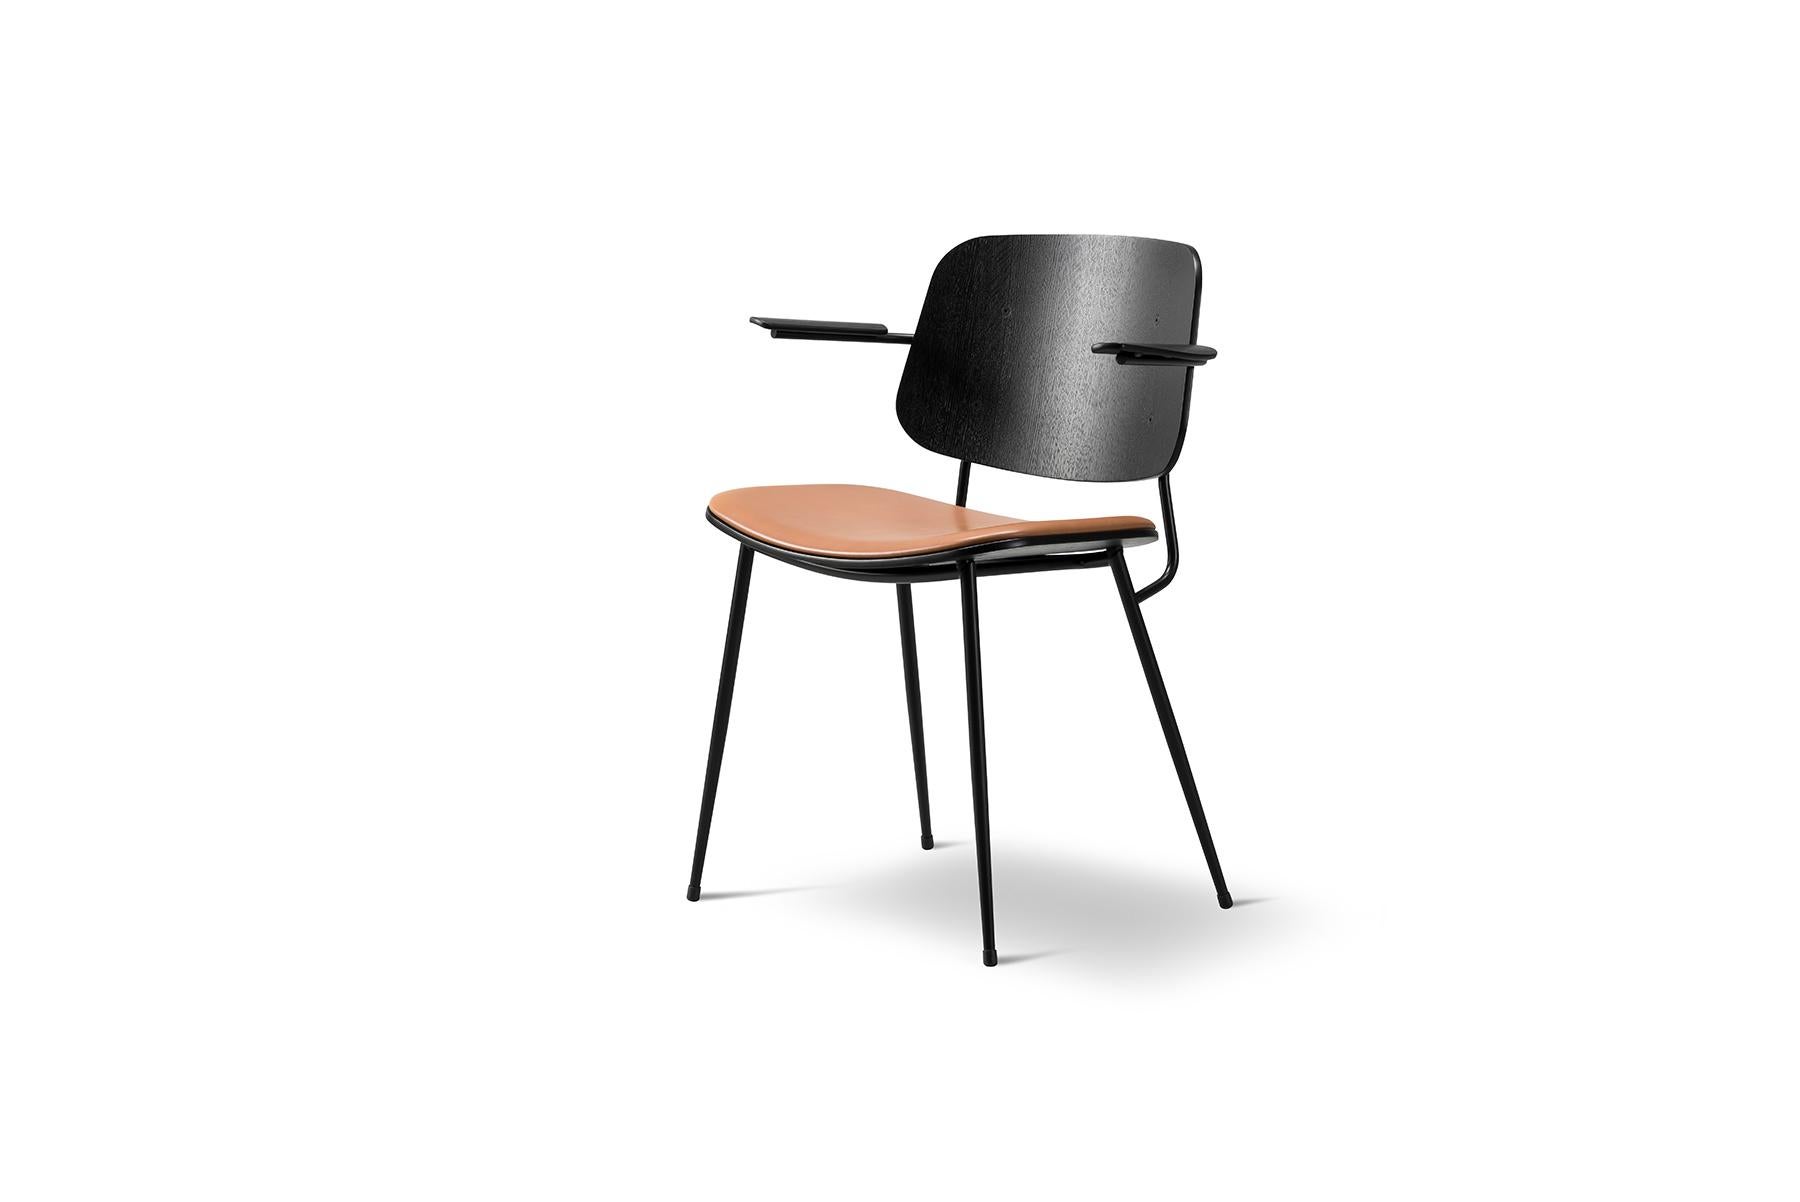 In 1952 Mogensen built onto the Søborg series with a steel-framed version, a design that he viewed as a reflection on international modernism. The generous back and seat with optional upholstery provides for many hours of use.